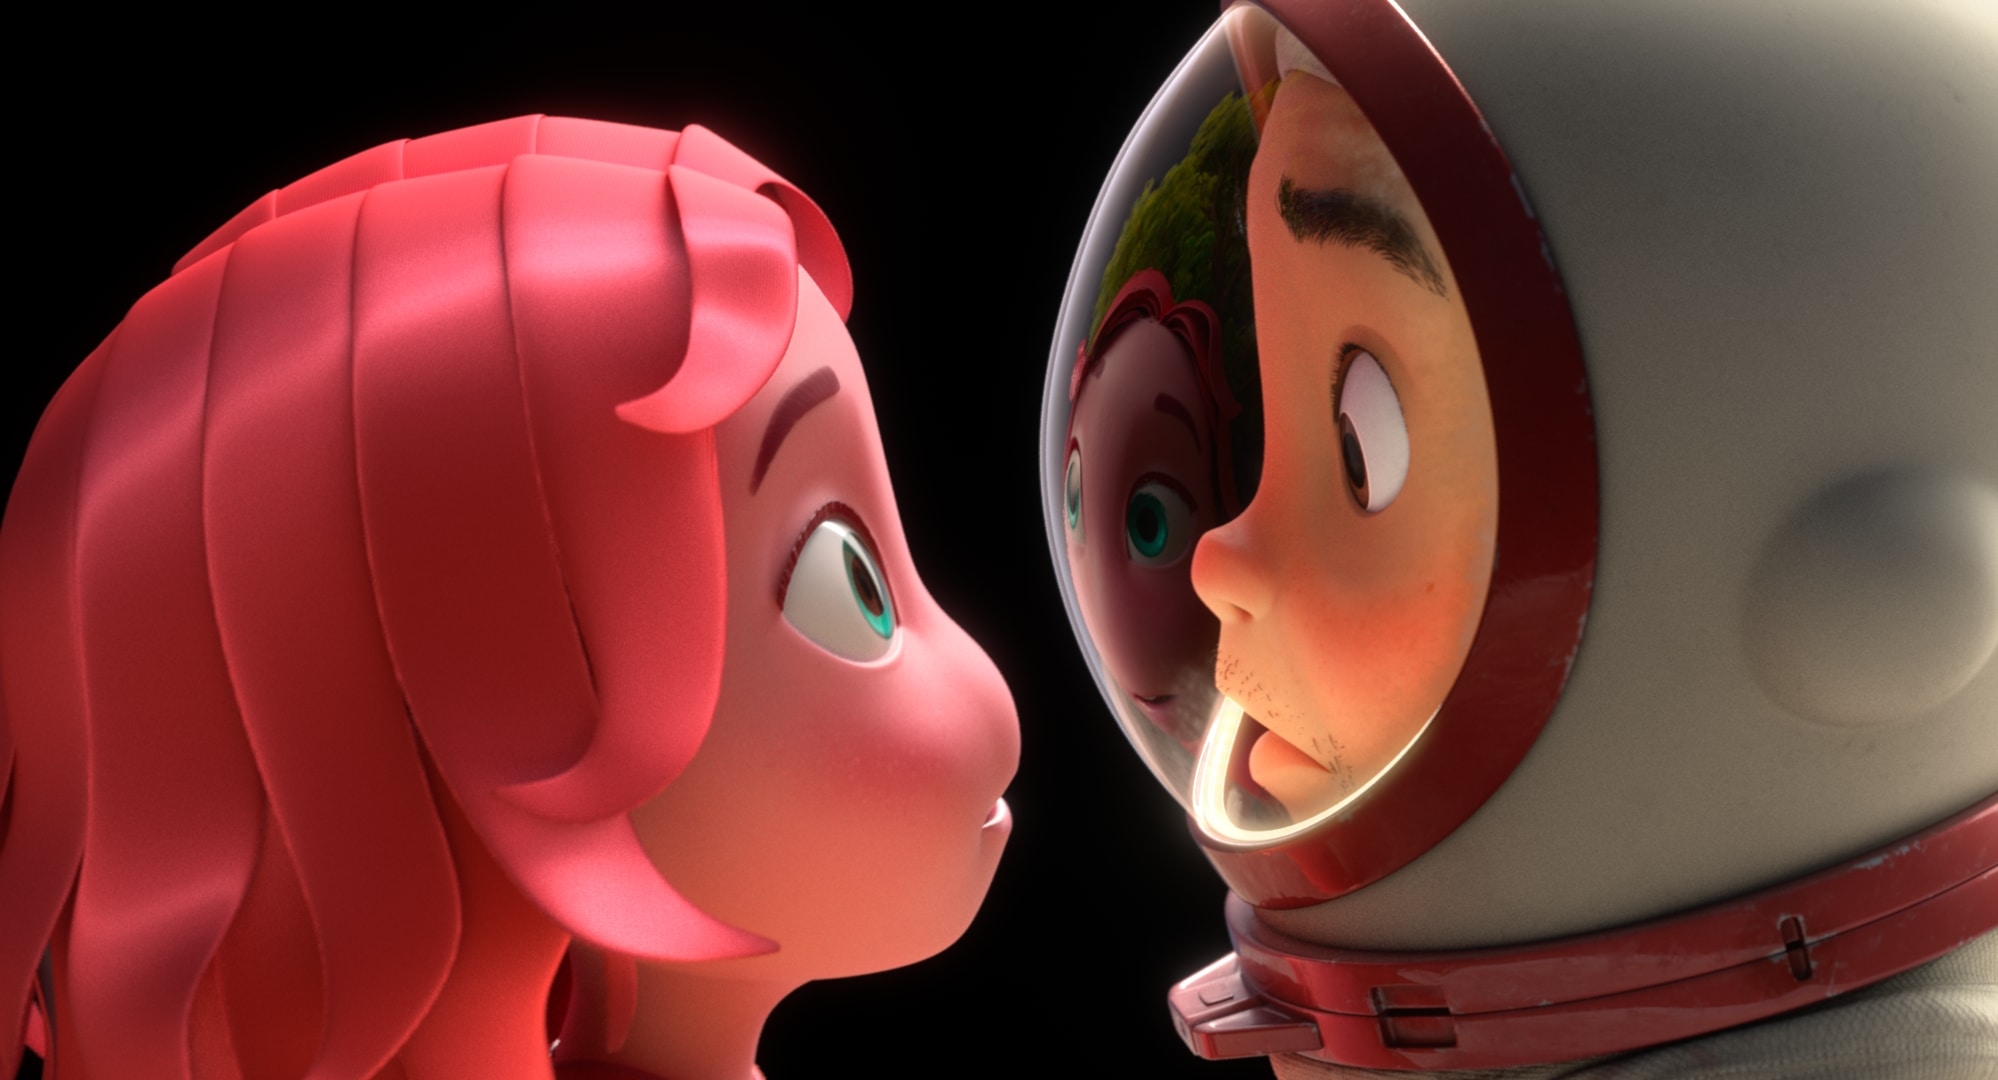 Blush review: Apple TV+'s new animated short wants to take on Pixar.